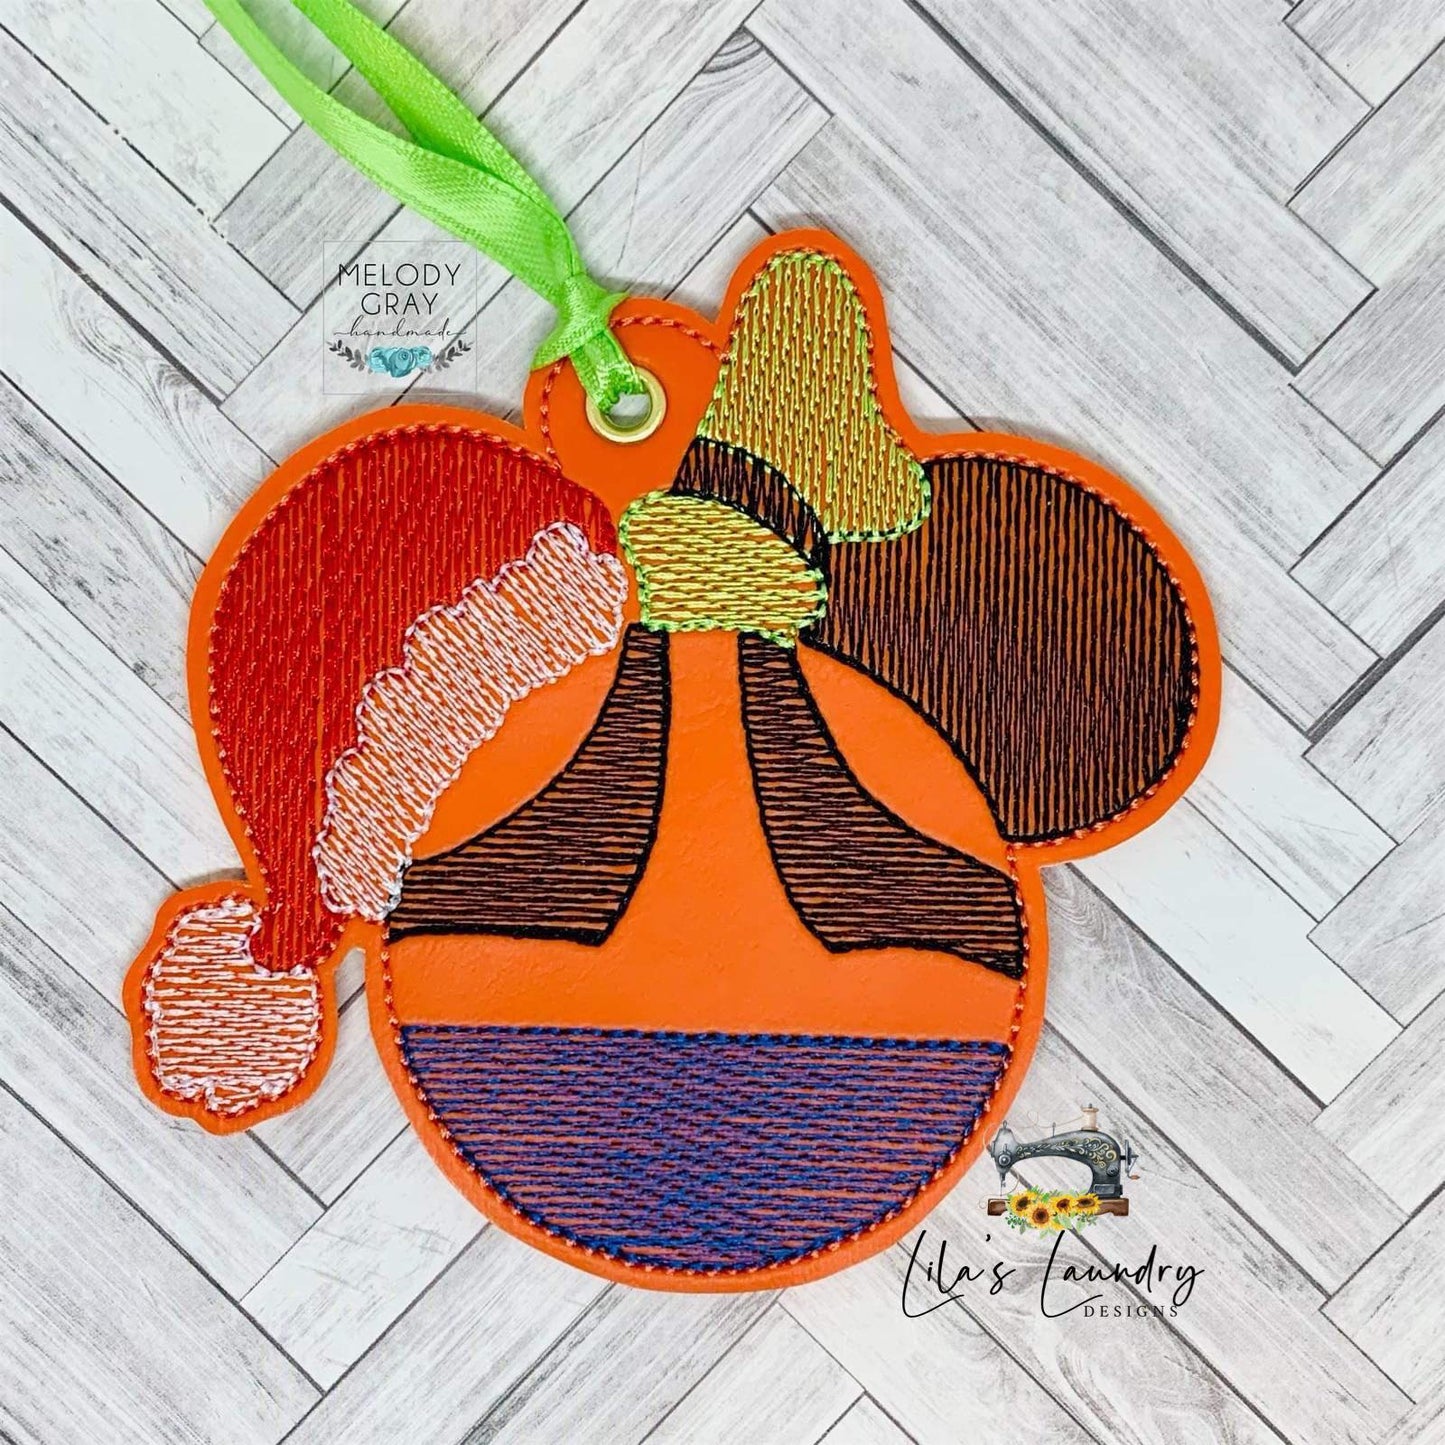 Silly Dog Mouse Sketch Ornament - Digital Embroidery Design